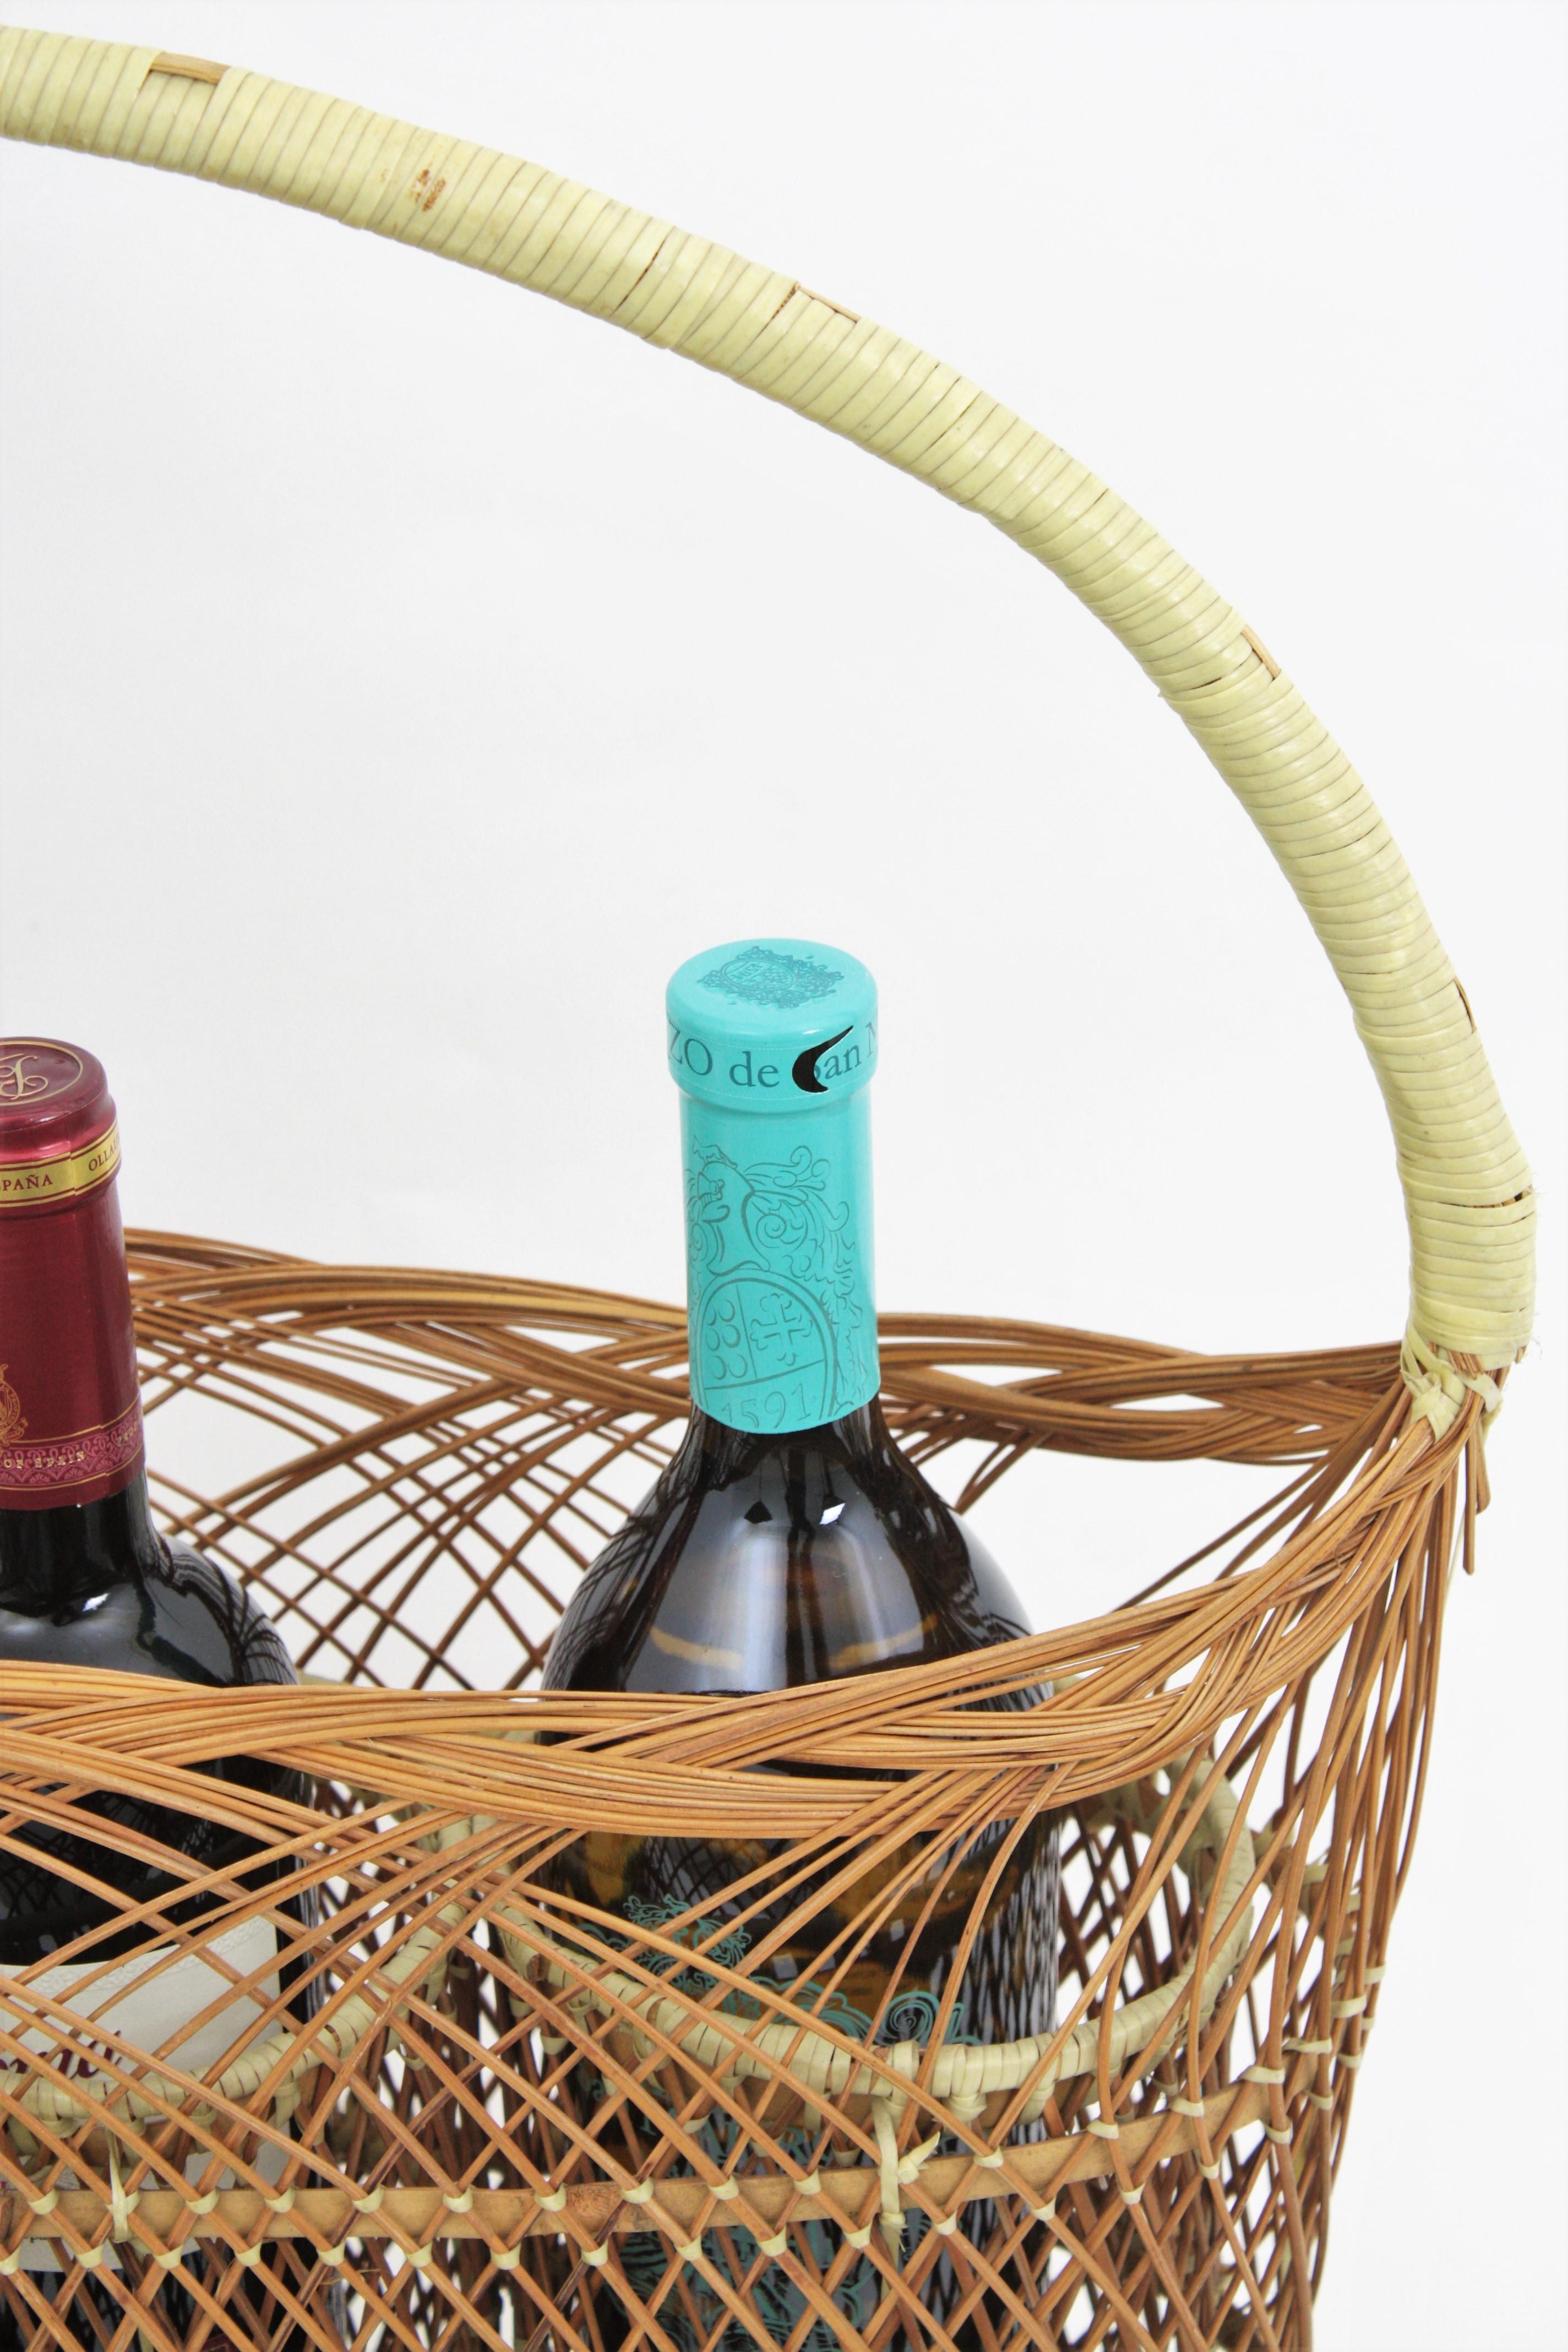 20th Century Rattan Woven Bottle Rack Stand Carrier Basket, France, 1960s